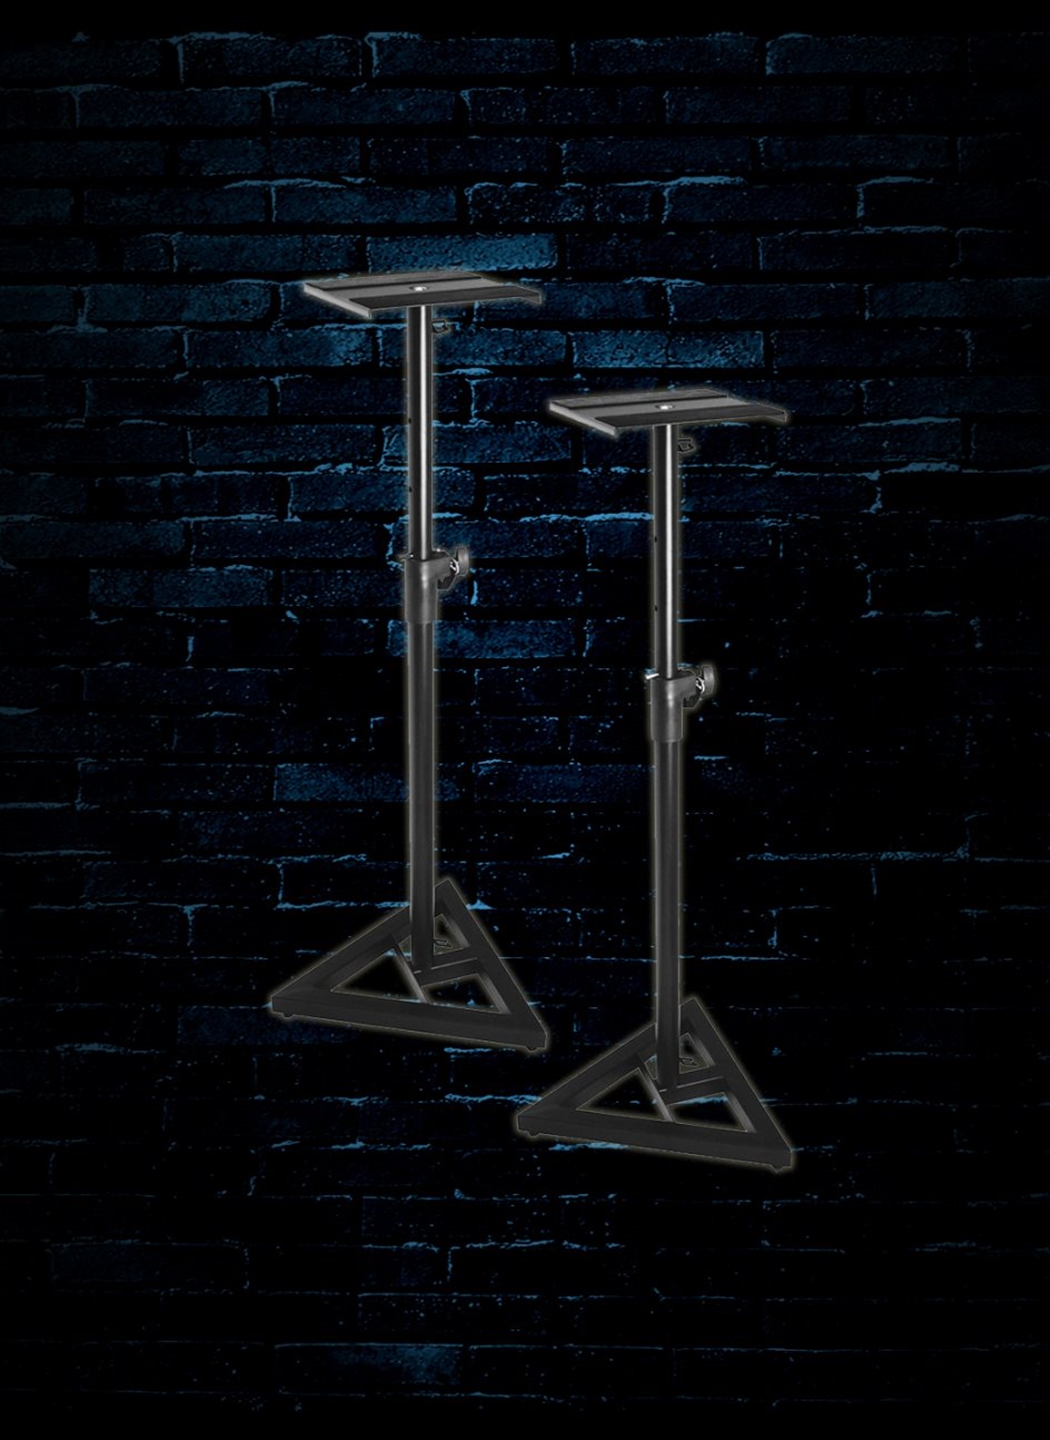 on stage studio monitor stands